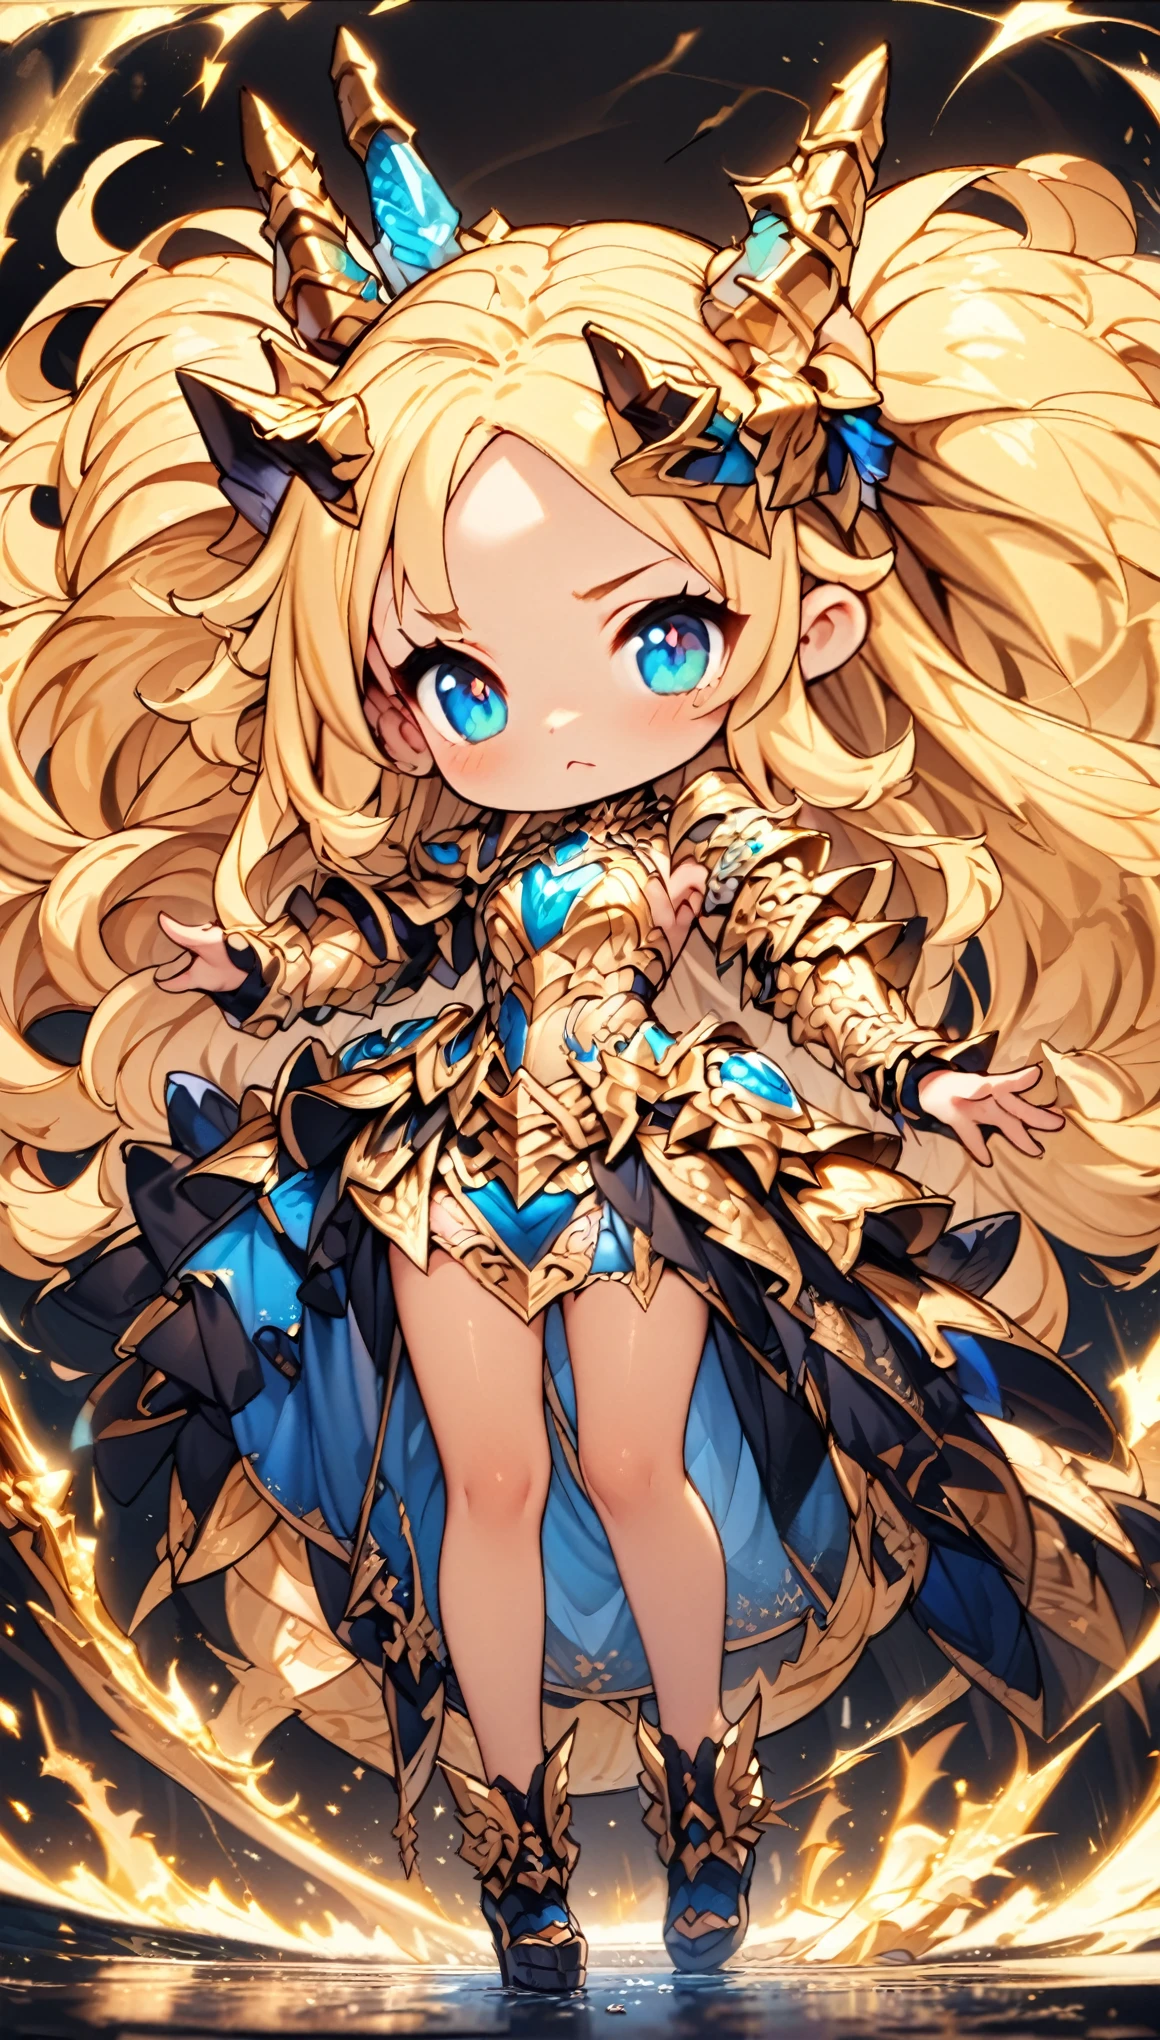 masterpiece, Best Quality, Very detailed, High resolution, Japanese anime、1girl, Blonde Hair、（Medium length hair：1.4）、Side braid hair, Curly Hair, Wavy Hair、, Drill Hair, Curly Outward Hair, Dragon Horn、（blue eyes：1.5）、（Beautiful detailed eyes：1.4）、Laughter、12 years old、3 heads, original character, Fantasy、（Black Background：1.2）、(full body:1.8)、Beautiful fingers, Are standing、（Gold Lace Frill Armor Dress：1.5）、（Jeweled Headgear：1.5）、Photographed from the front, View your viewers